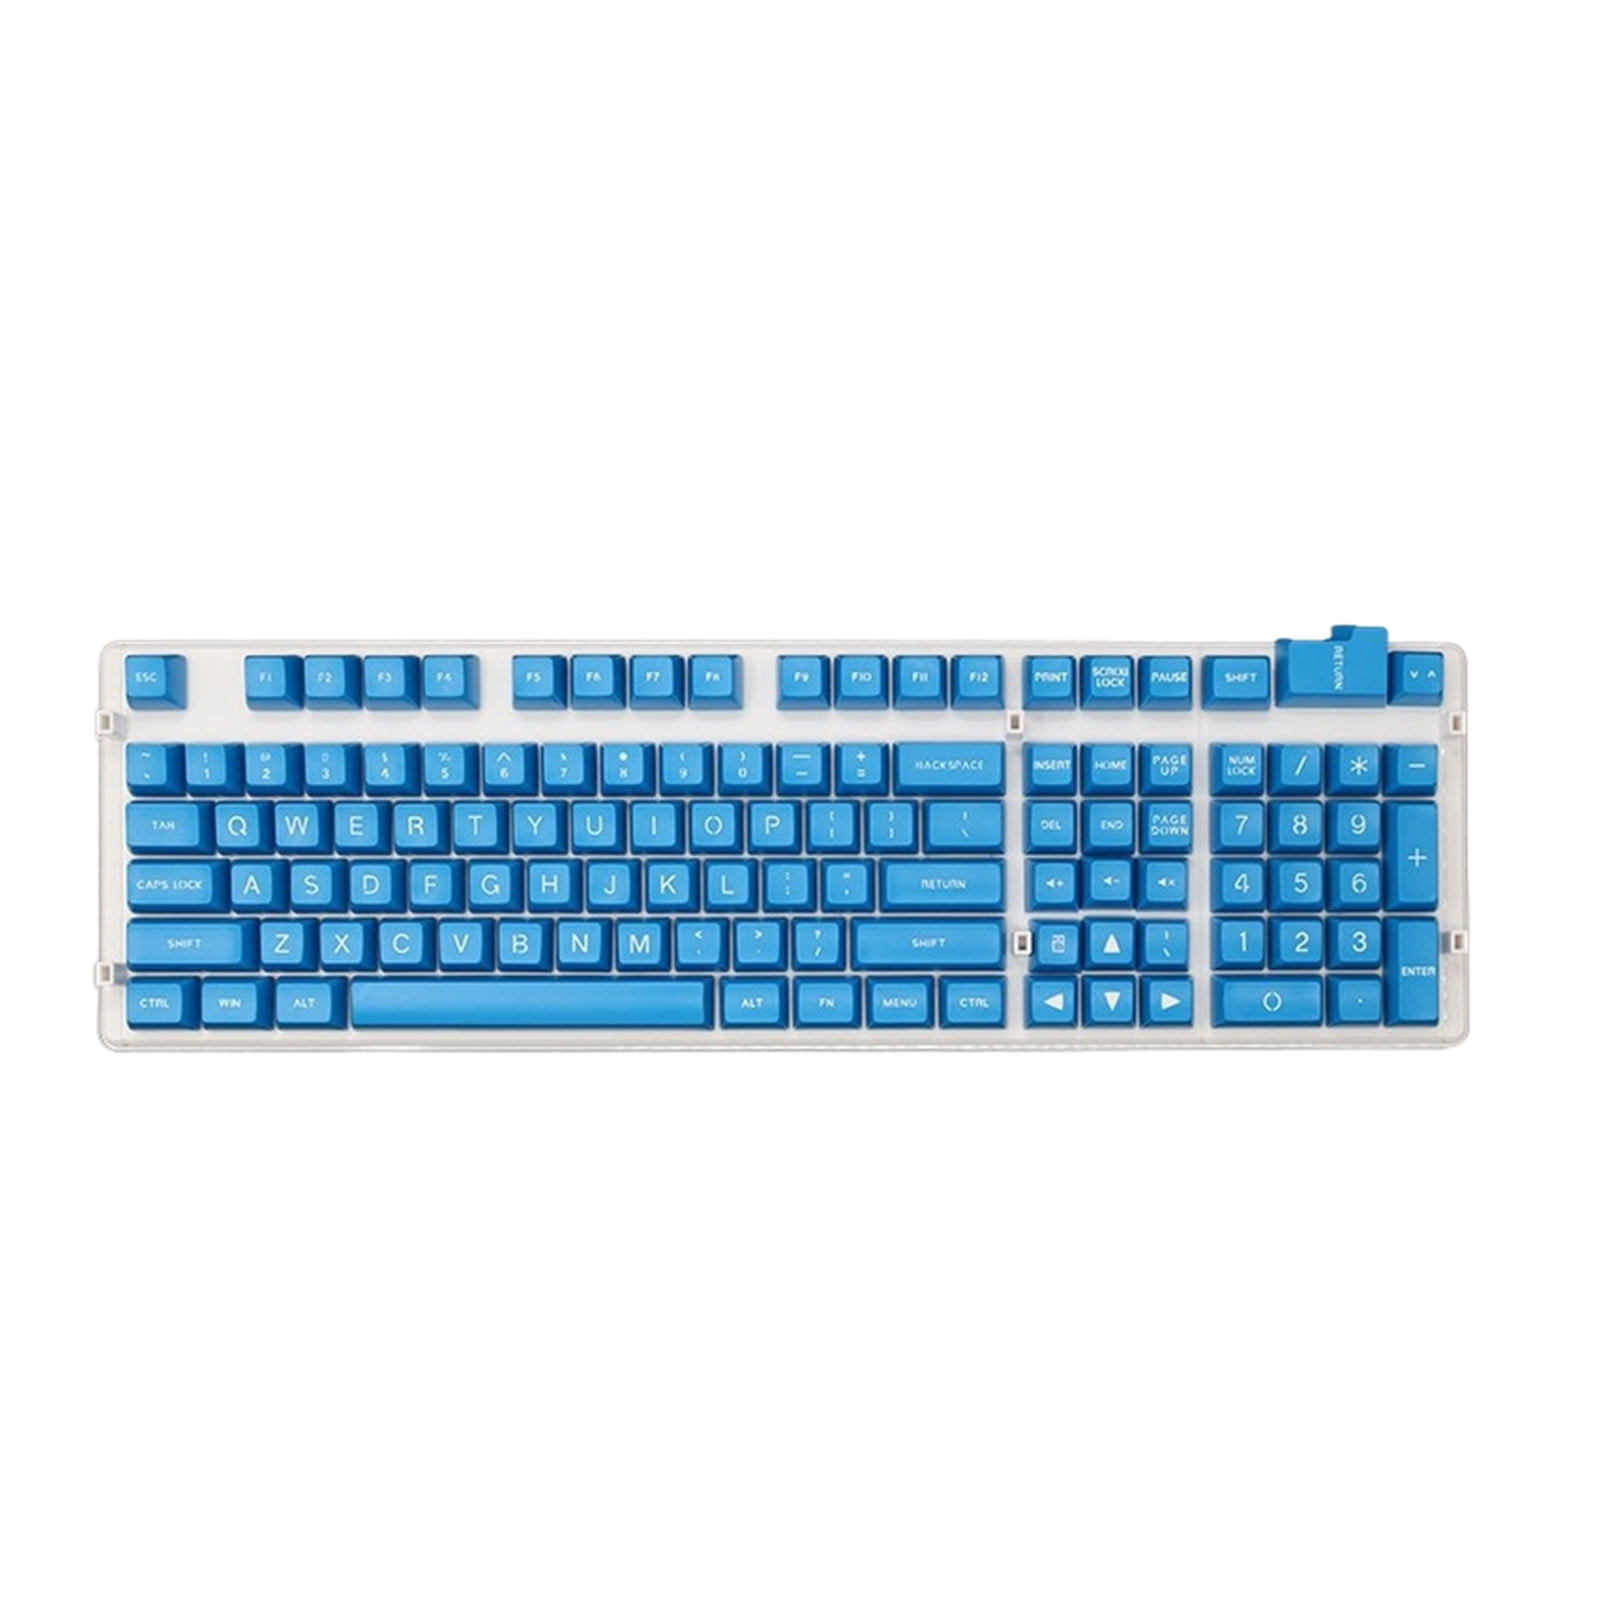 108 Basic Keycaps and 51 Auxiliary Keycaps SSSLG SA Keycaps ABS Dark Blue Keycaps Suitable for Mechanical Keyboard Installation 